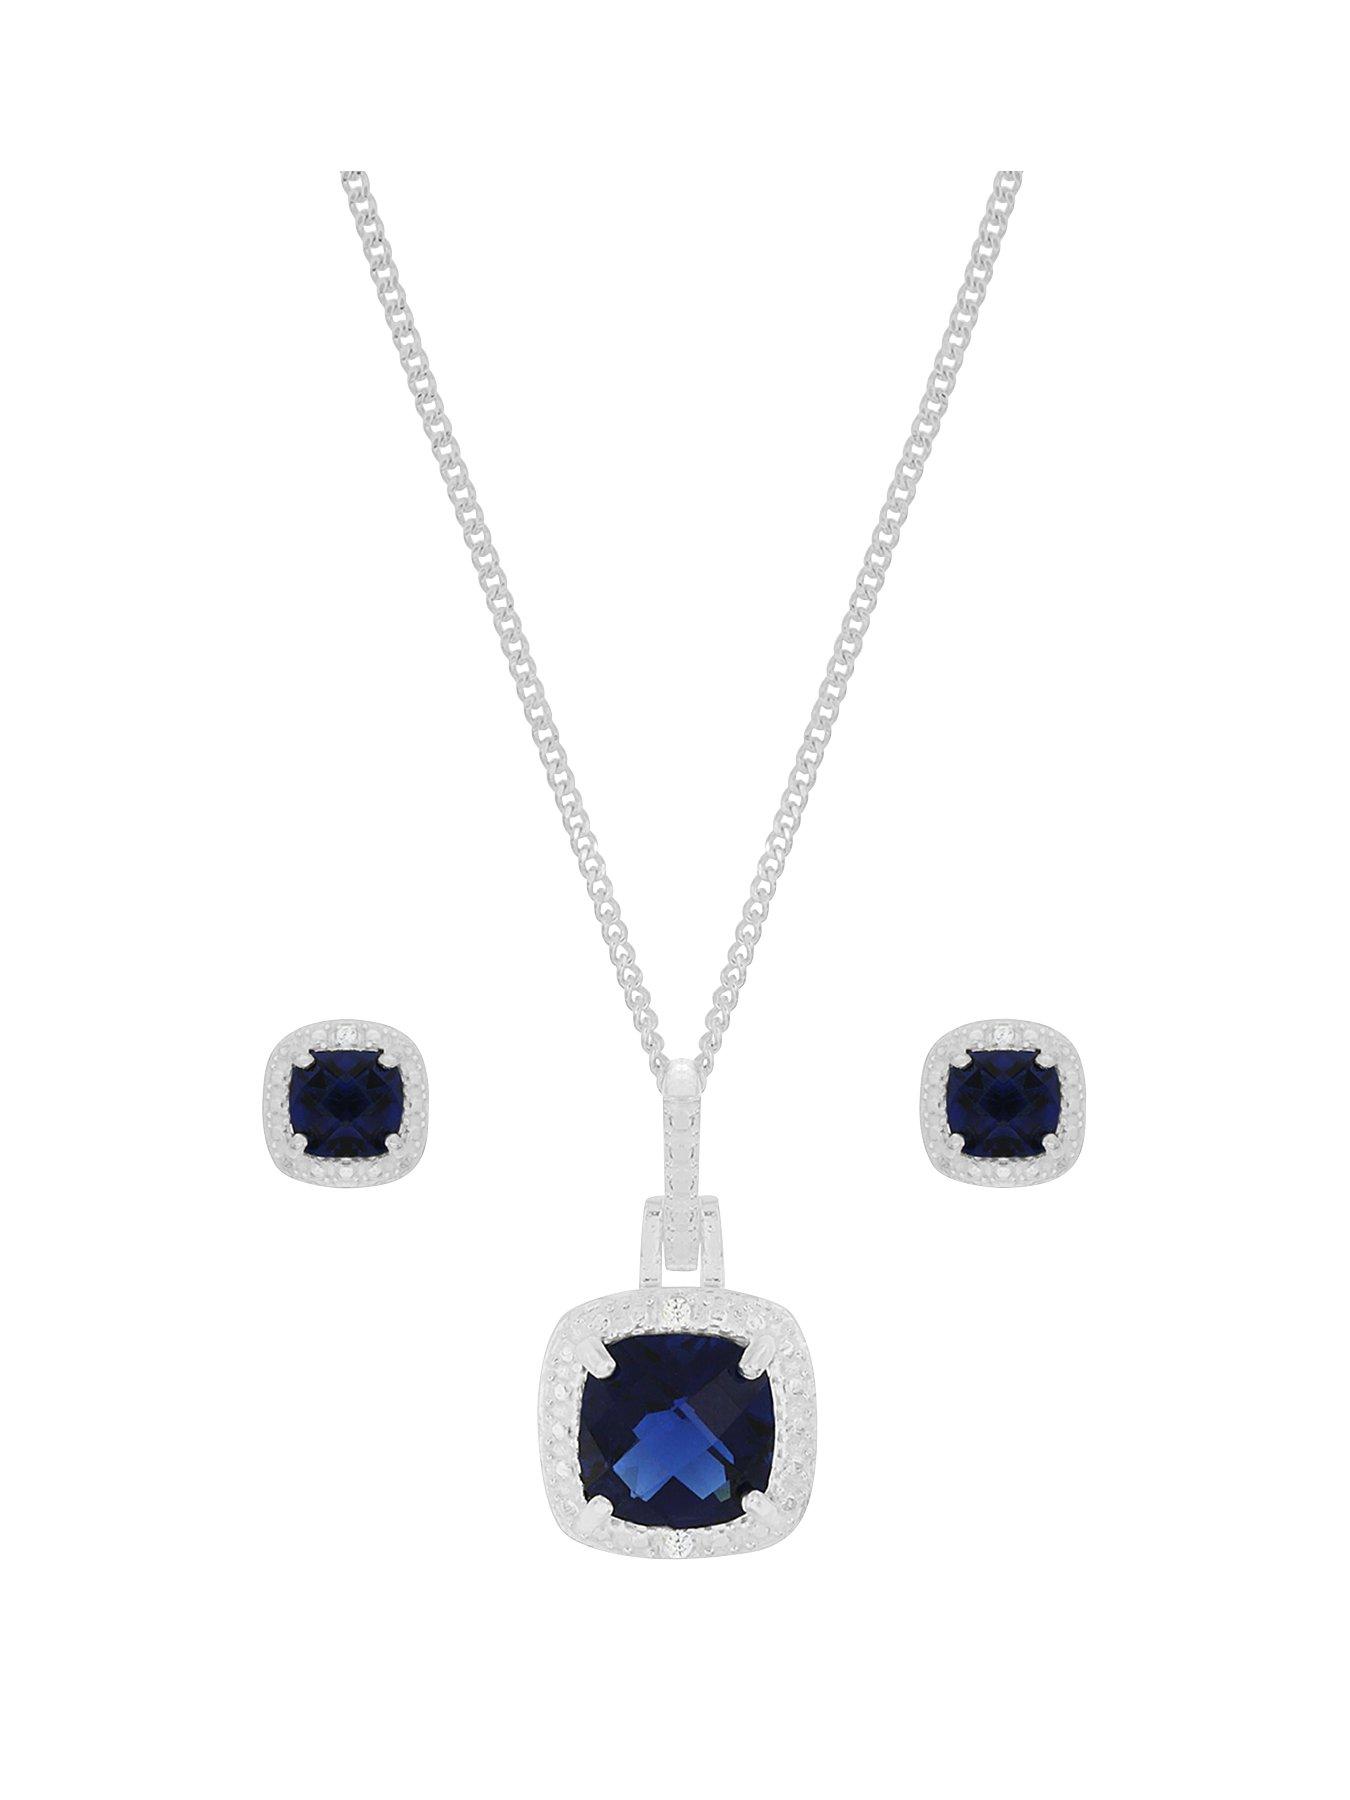  Sterling Silver Blue and White Cubic Zirconia Cushion Cut Necklace and Earring Set